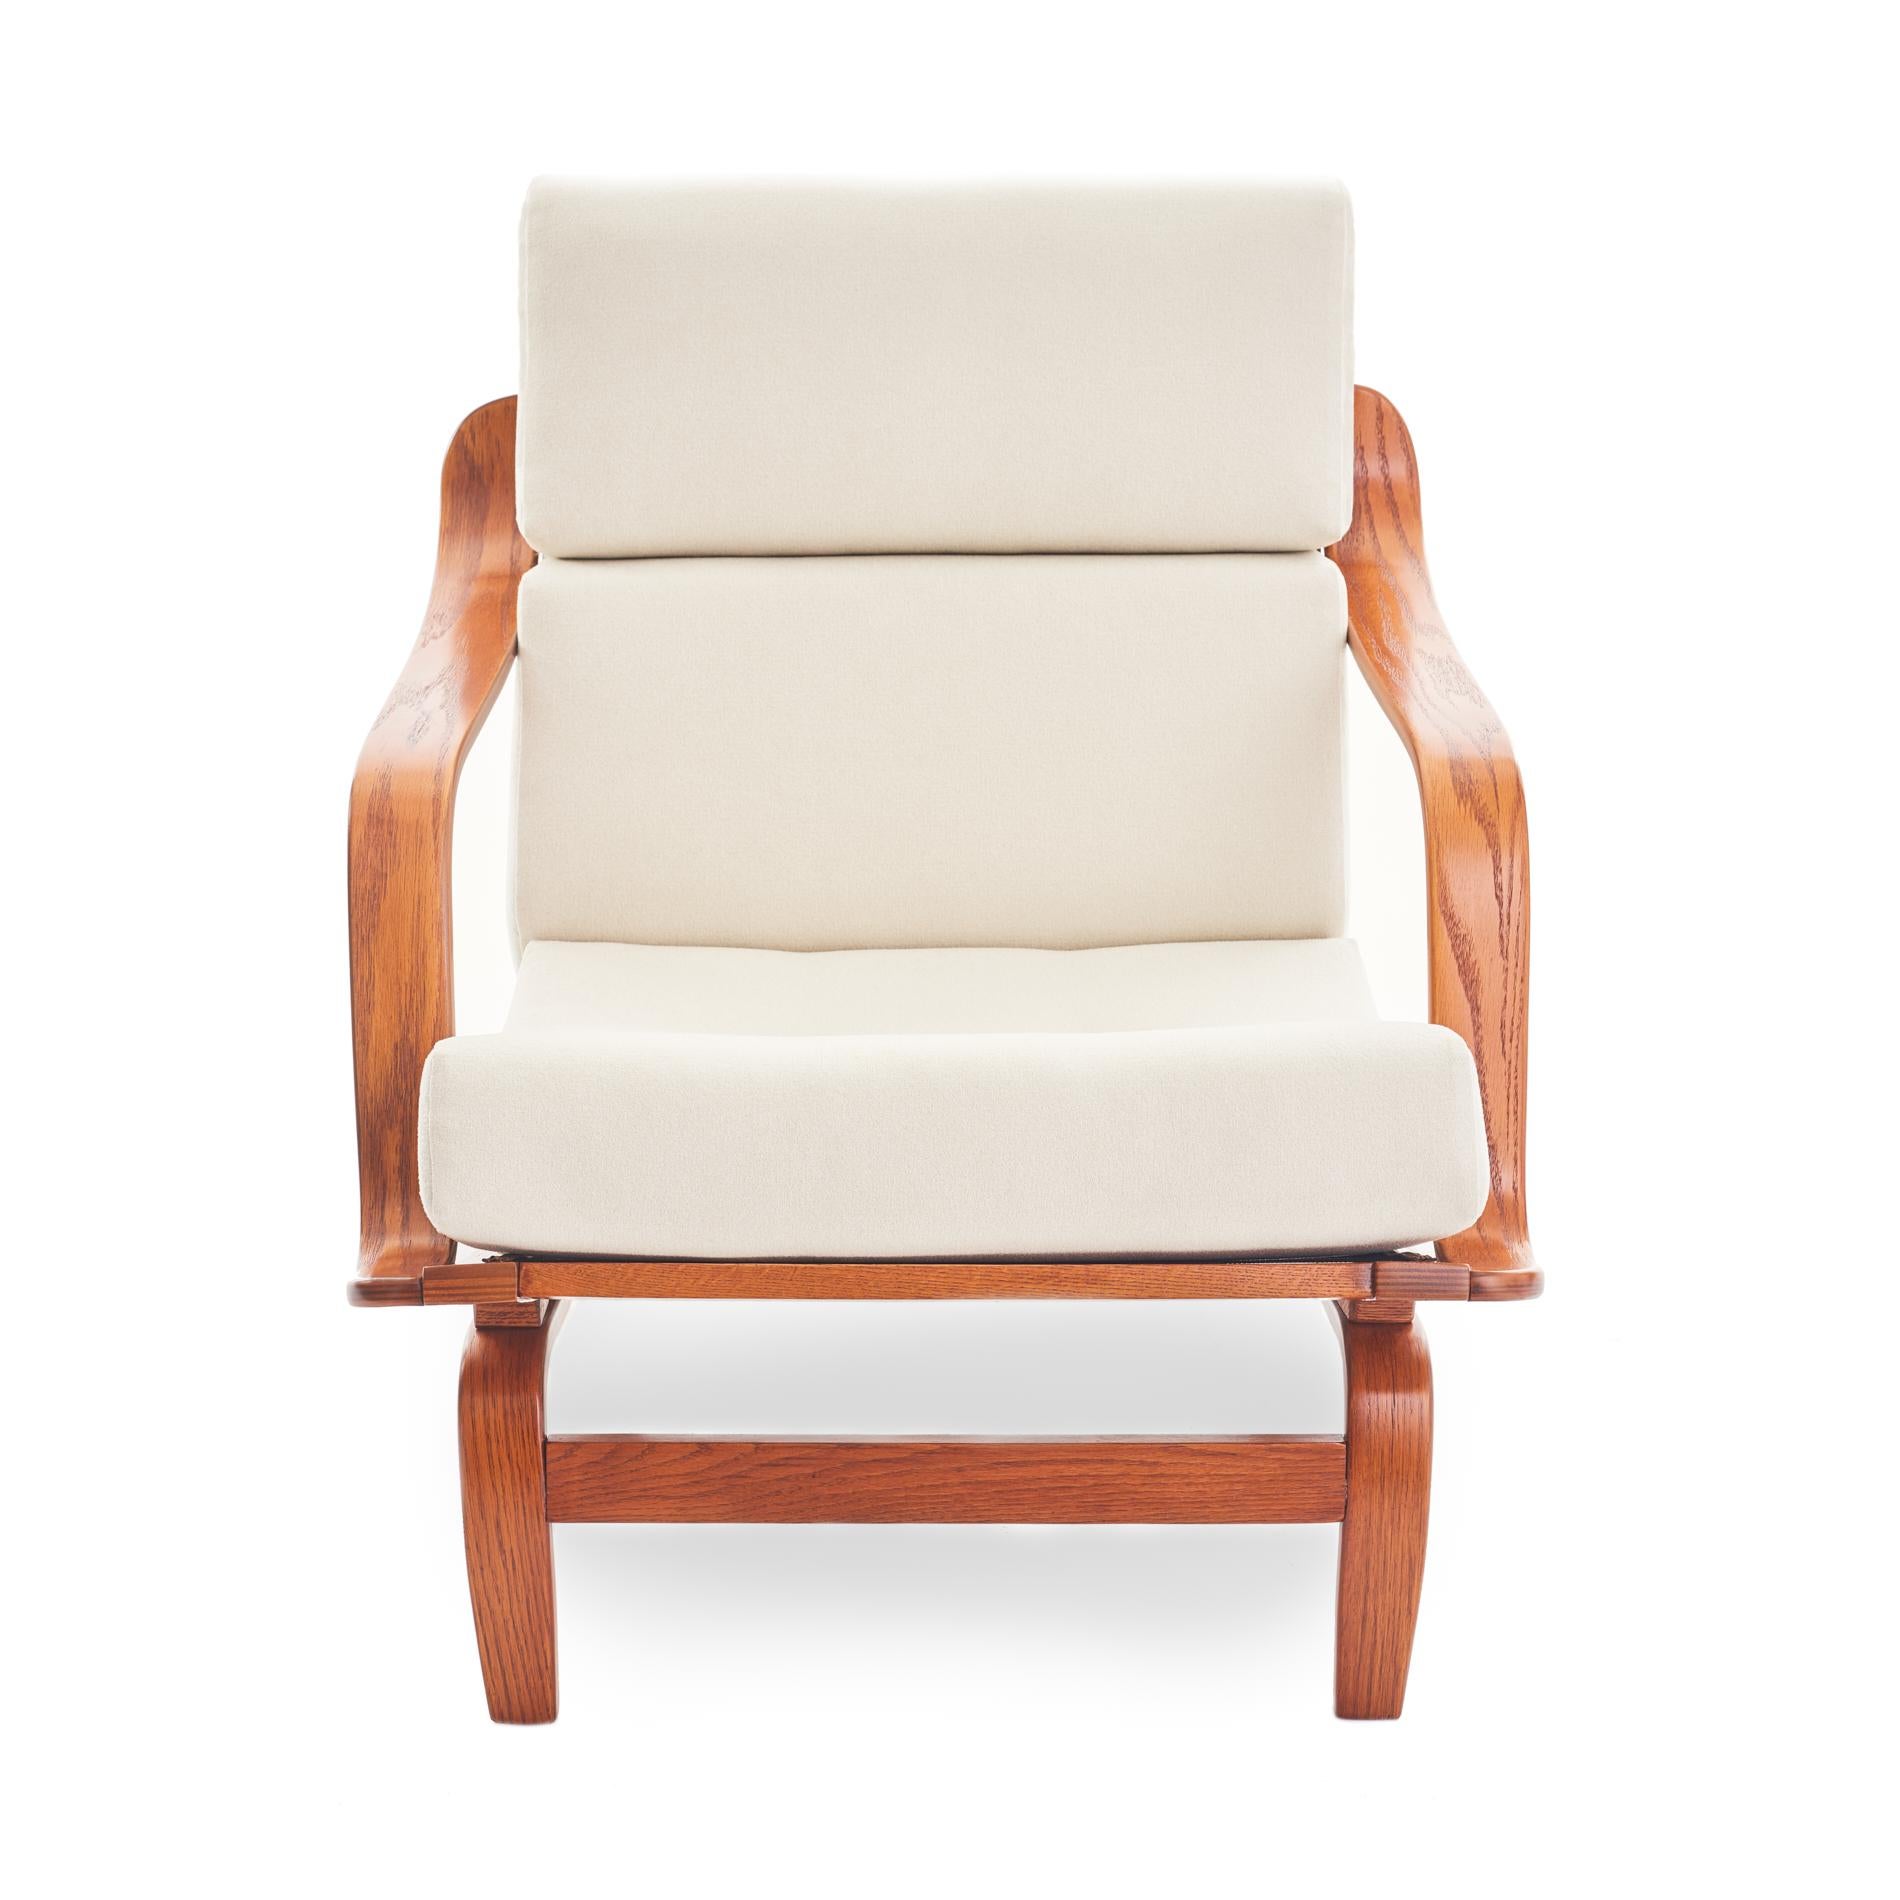 Svelte Danish or Scandinavian style bentwood lounge chair, with curvaceous arms and sculptural legs. Newly upholstered cushions feature a crisp cream flat wool fabric. This chair has been completely refurbished, and all joinery has been cleaned and